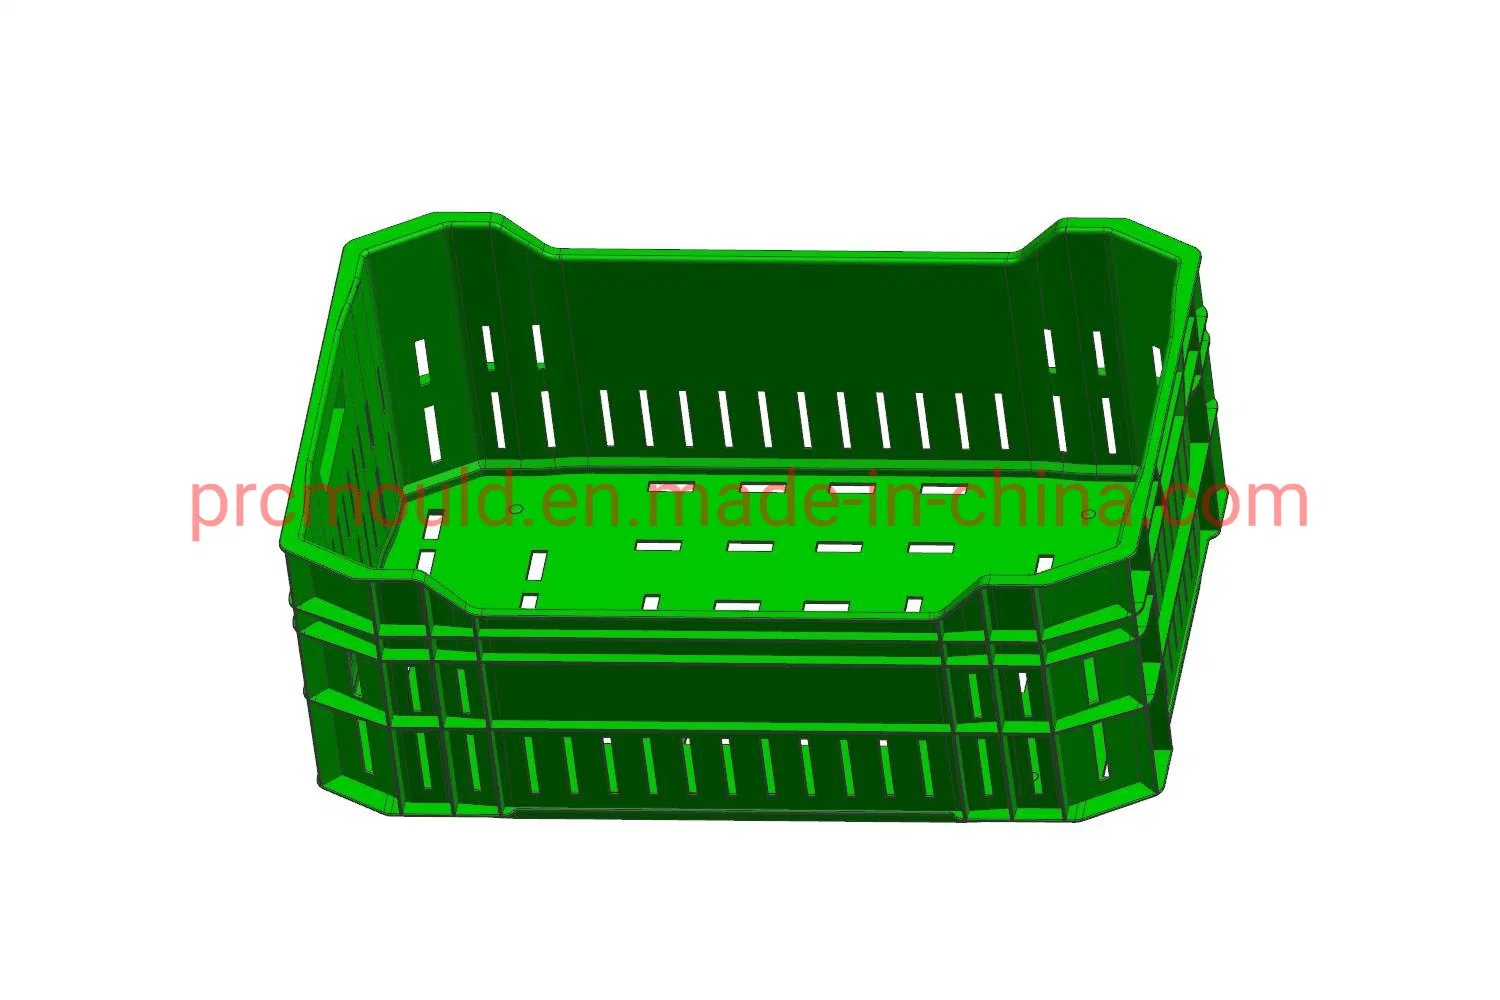 Plastic Injection Strong Vegetable Crate Box Mold Manufacturer From China